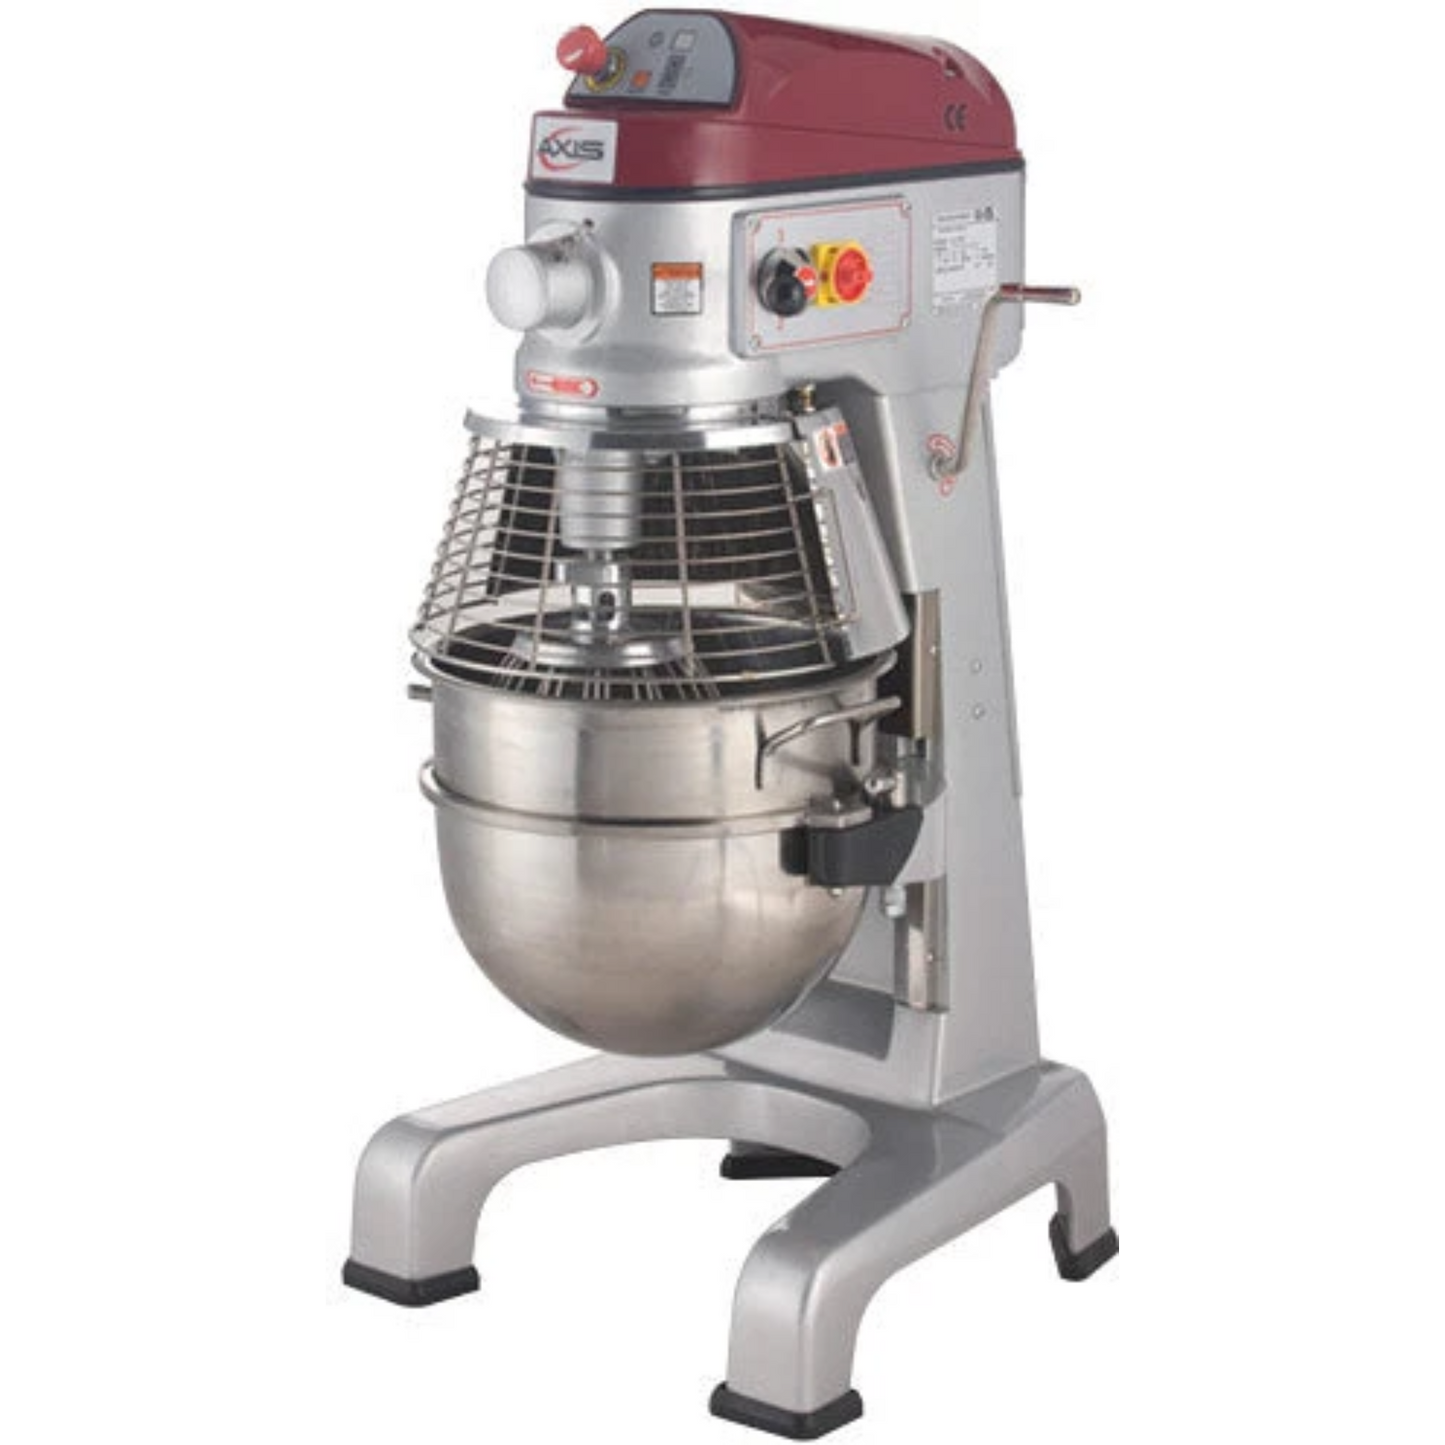 Axis AX-M30 Floor Model 30 Quart Planetary Mixer with Timer, 3-Speed, 1 HP